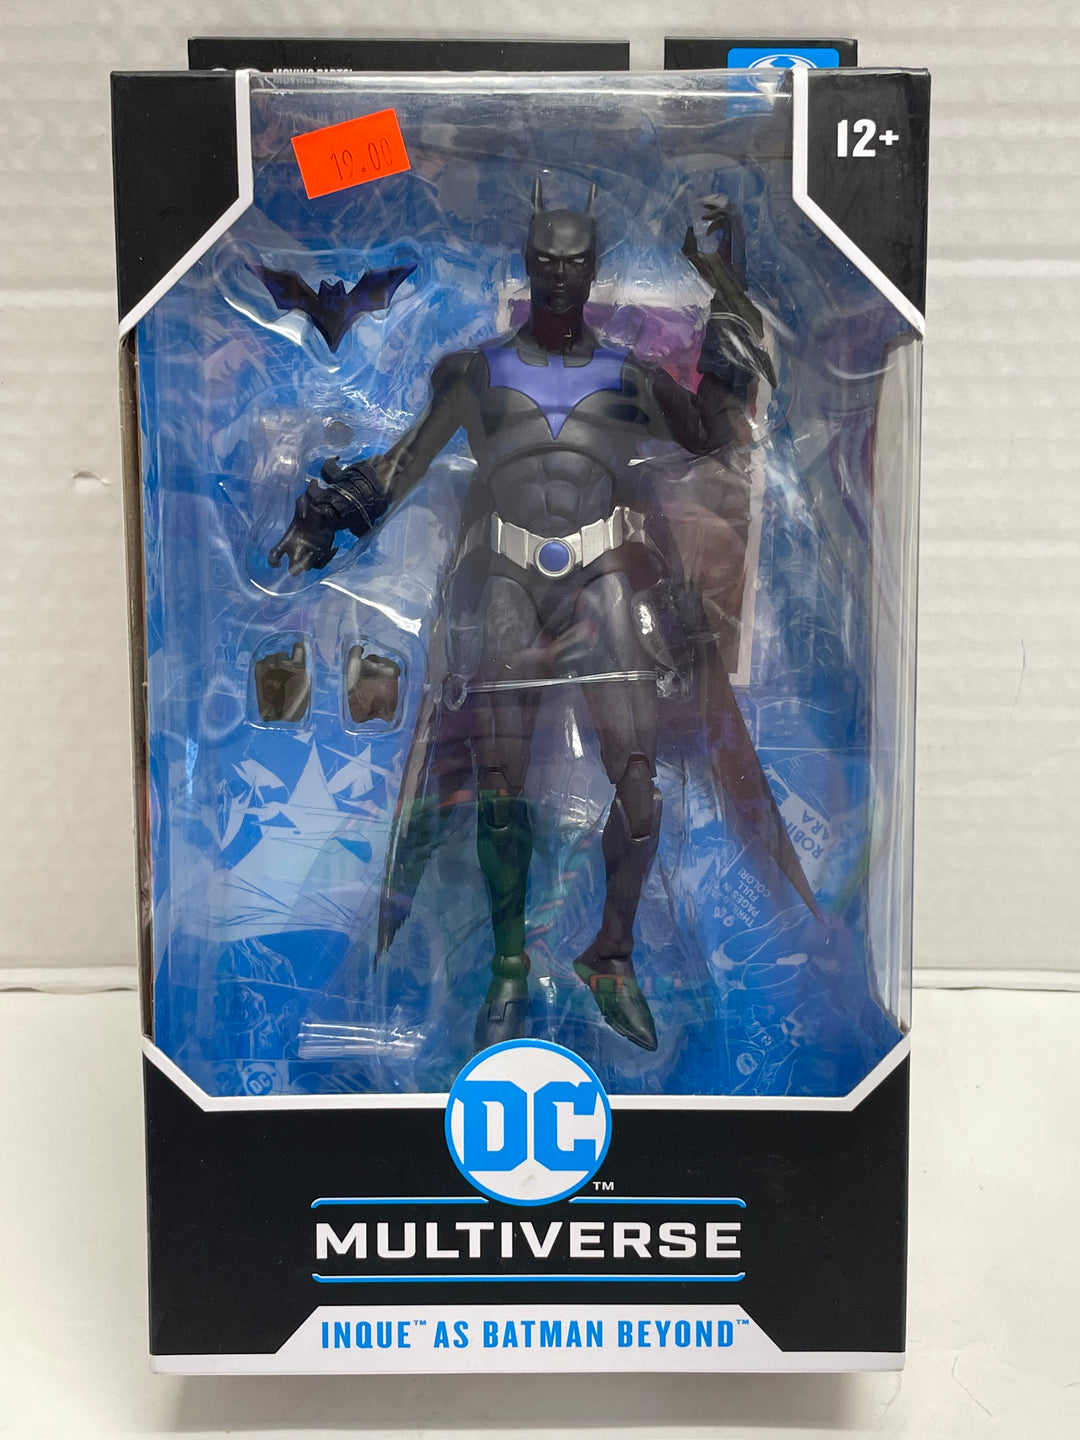 DC Multiverse Inque as Batman Beyond 7" Jointed Action Figure w/ 22 Moving Parts & Collector Card McFarlane Toys